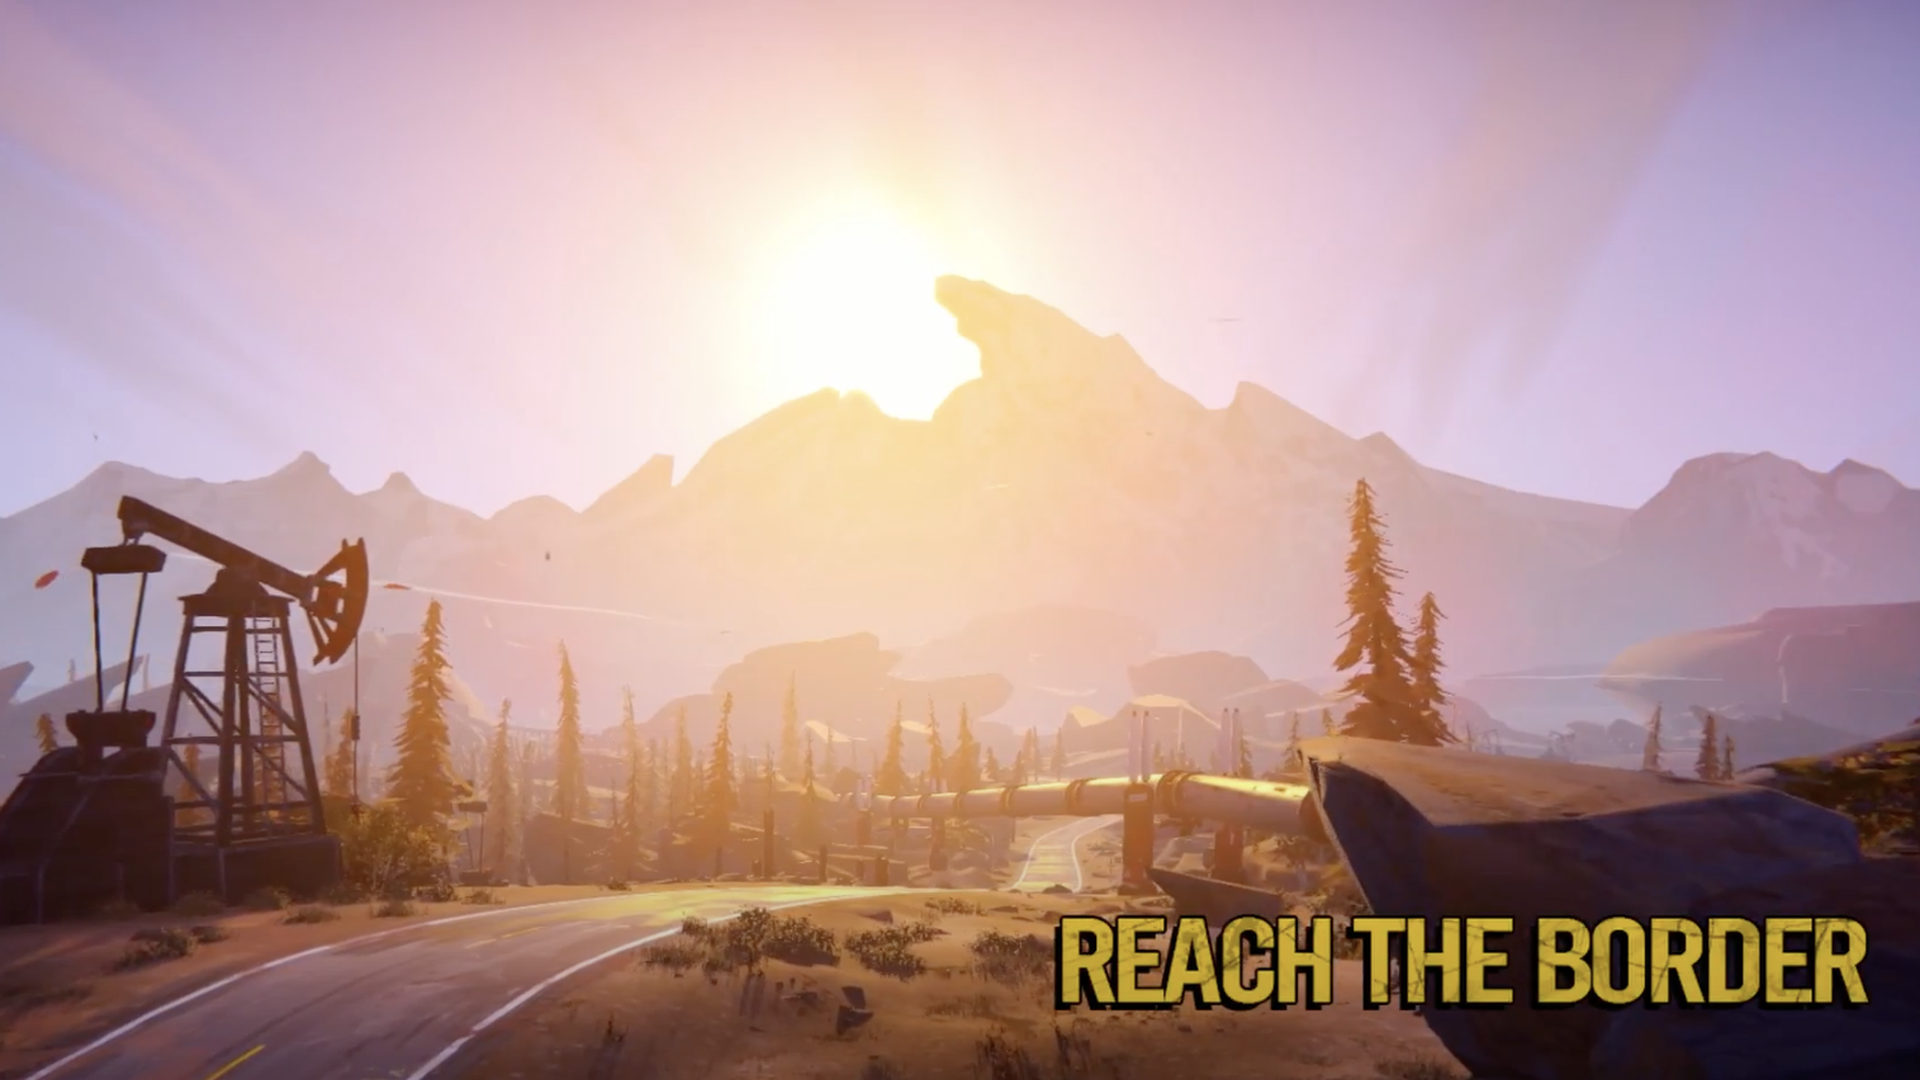 Video game screenshot of an advertisement that shows a road at sunset, with text on screen that states "reach the border"